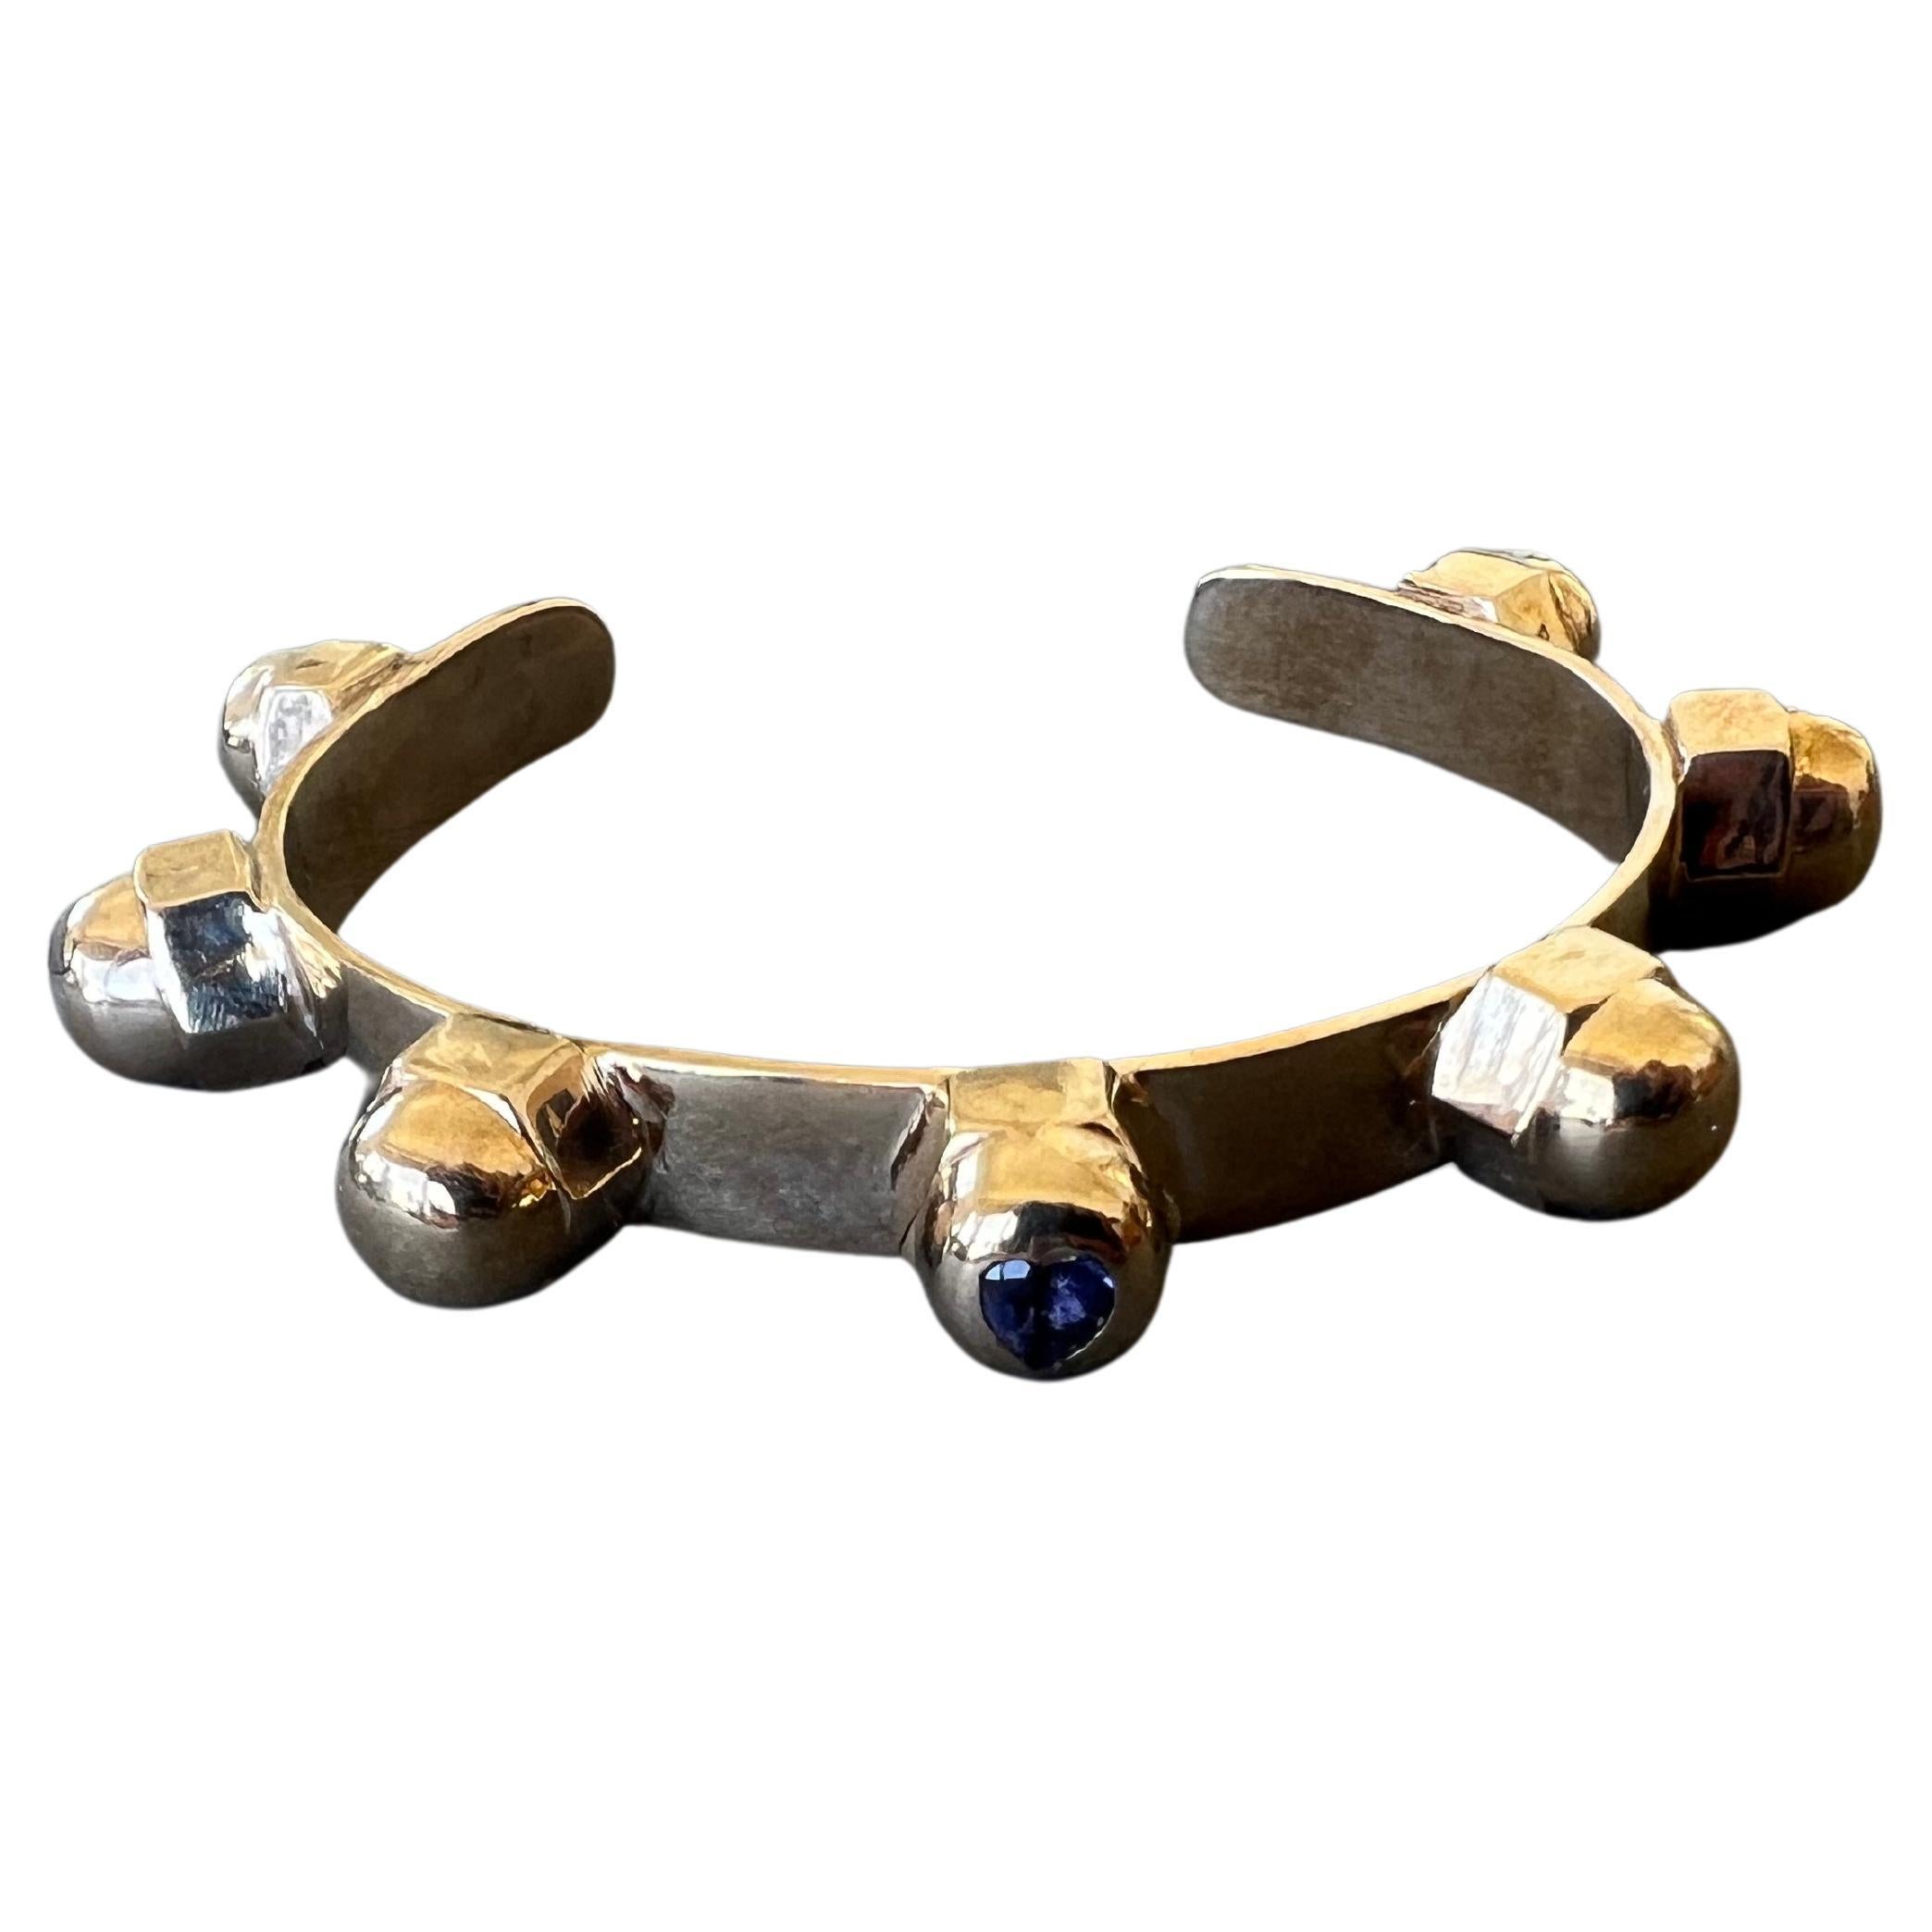 Tanzanite Heart Gem Cuff Bangle Bracelet 7 Studs J Dauphin

Material: Polished Bronze

Size Medium/ Large

Designer: J DAUPHIN 

Tanzanite is a rare gemstone found only in Tanzania and is known for its deep blue color reminiscent of the finest